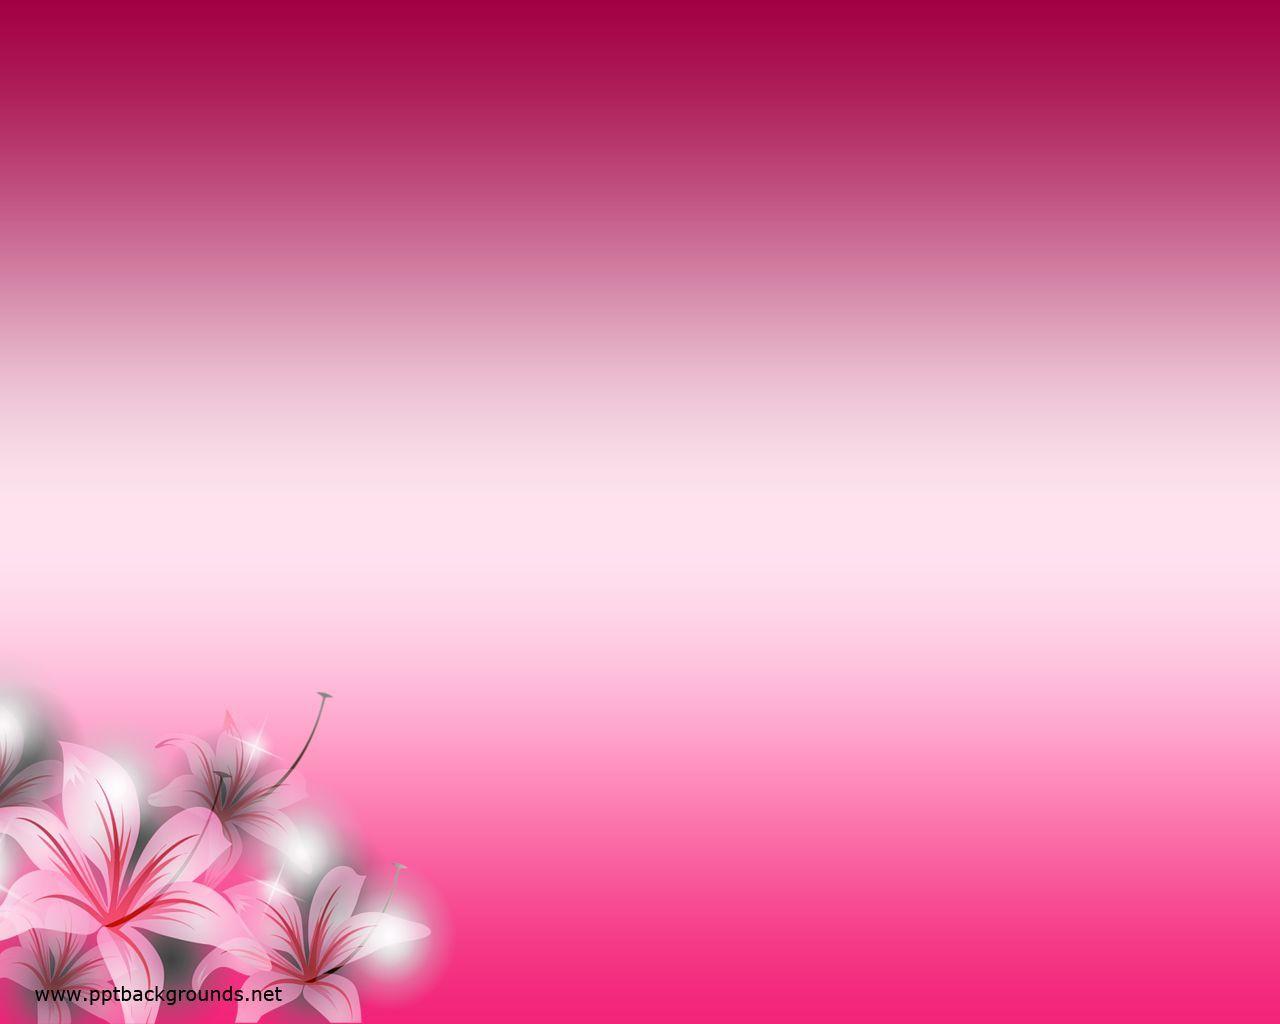 backgrounds-style-powerpoint-2016-color-pink-wallpaper-cave